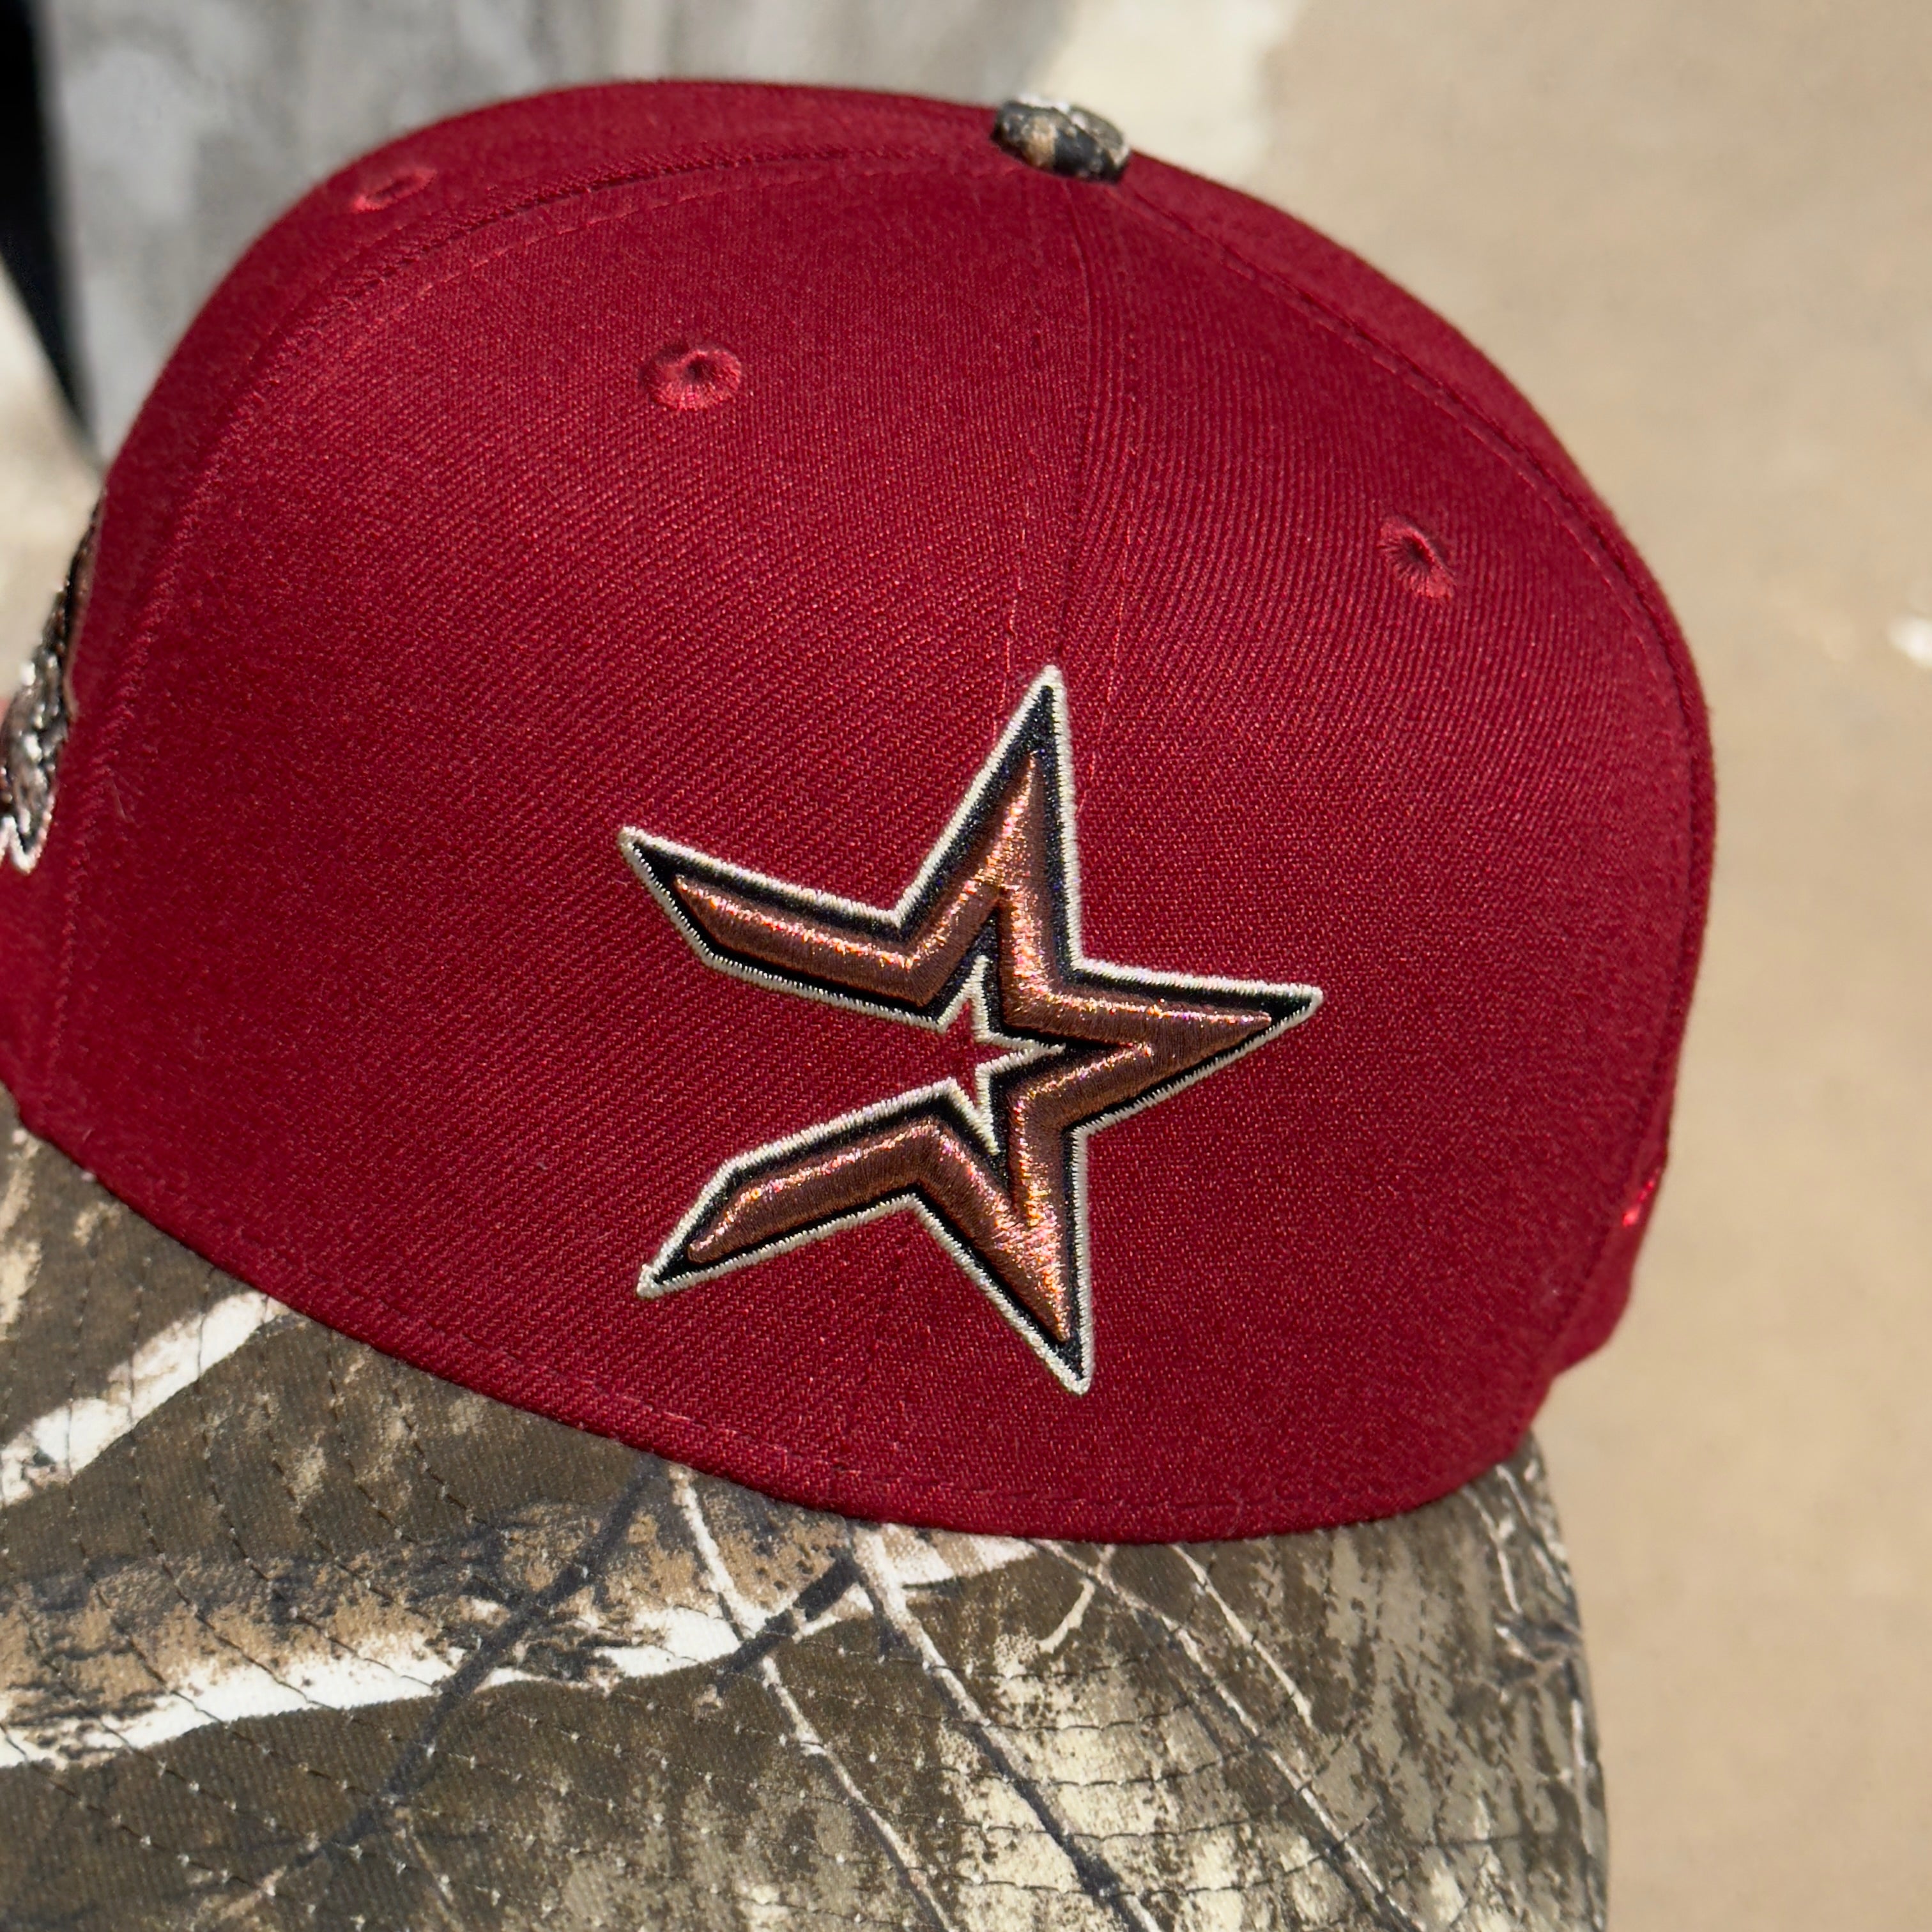 USED 3/4 Brick Red Houston Astros World Series 2005 59FIFTY New Era Fitted Hat